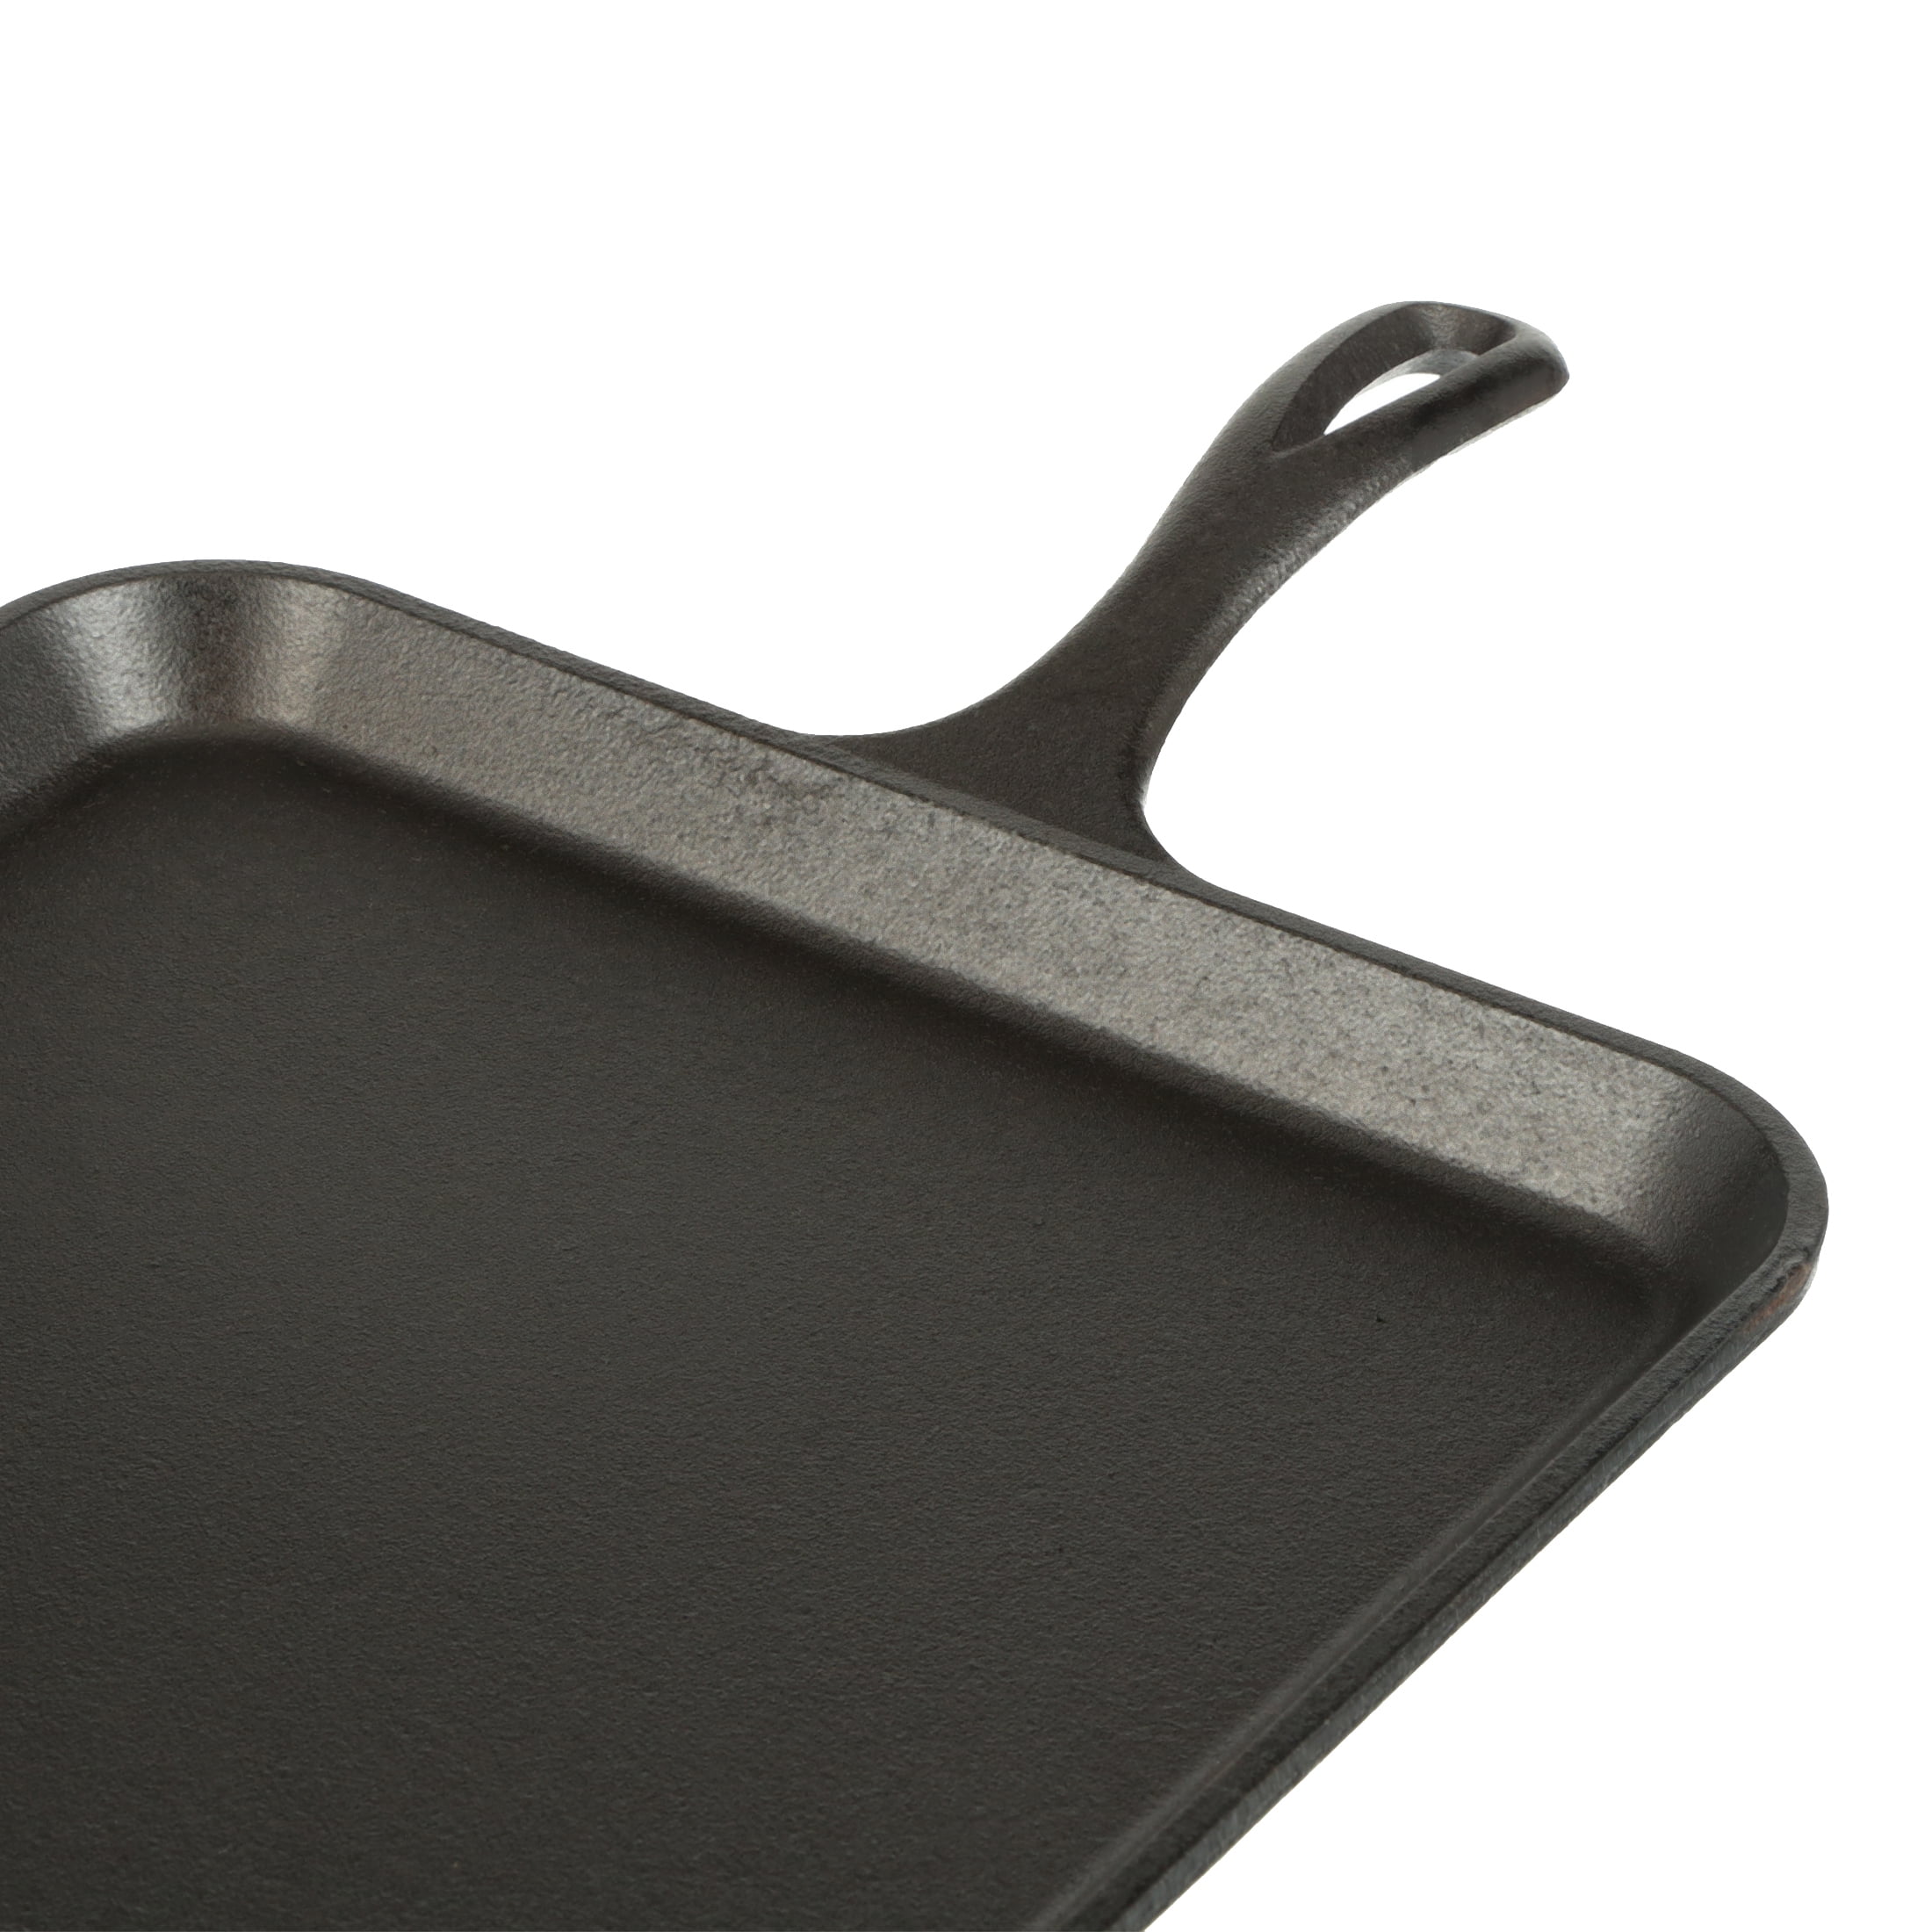 LODGE Cast Iron SEASONED Square Griddle Skillet Camping Pan P12SG 12x12x19  1/2